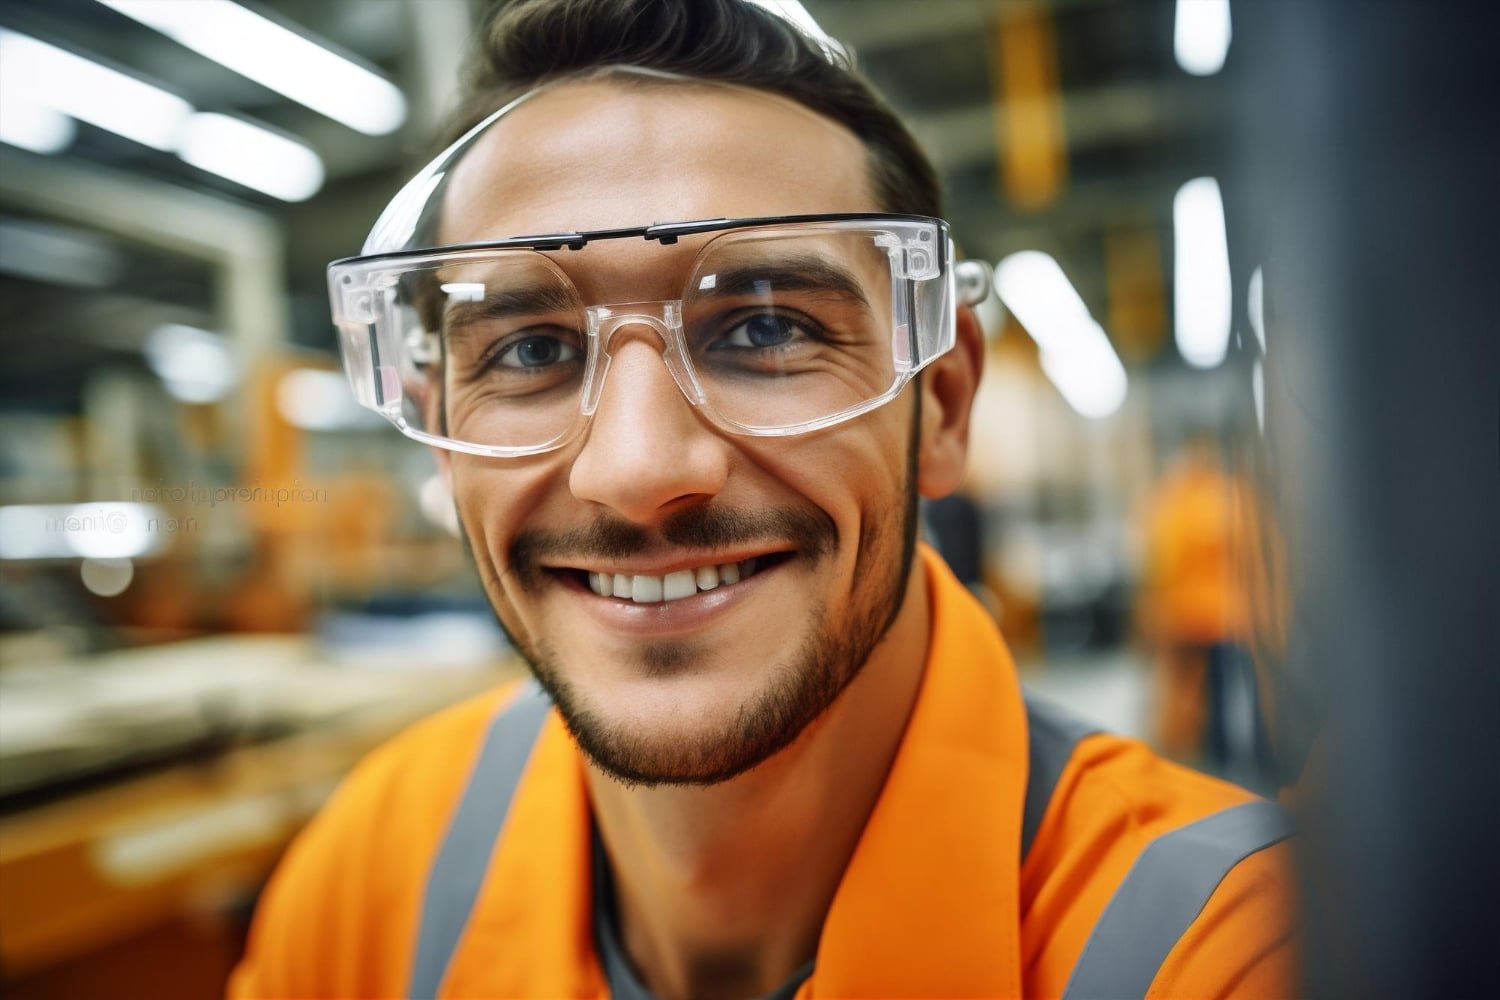 Read more about the article Find Protective Eyewear At RX Safety’s Online Store